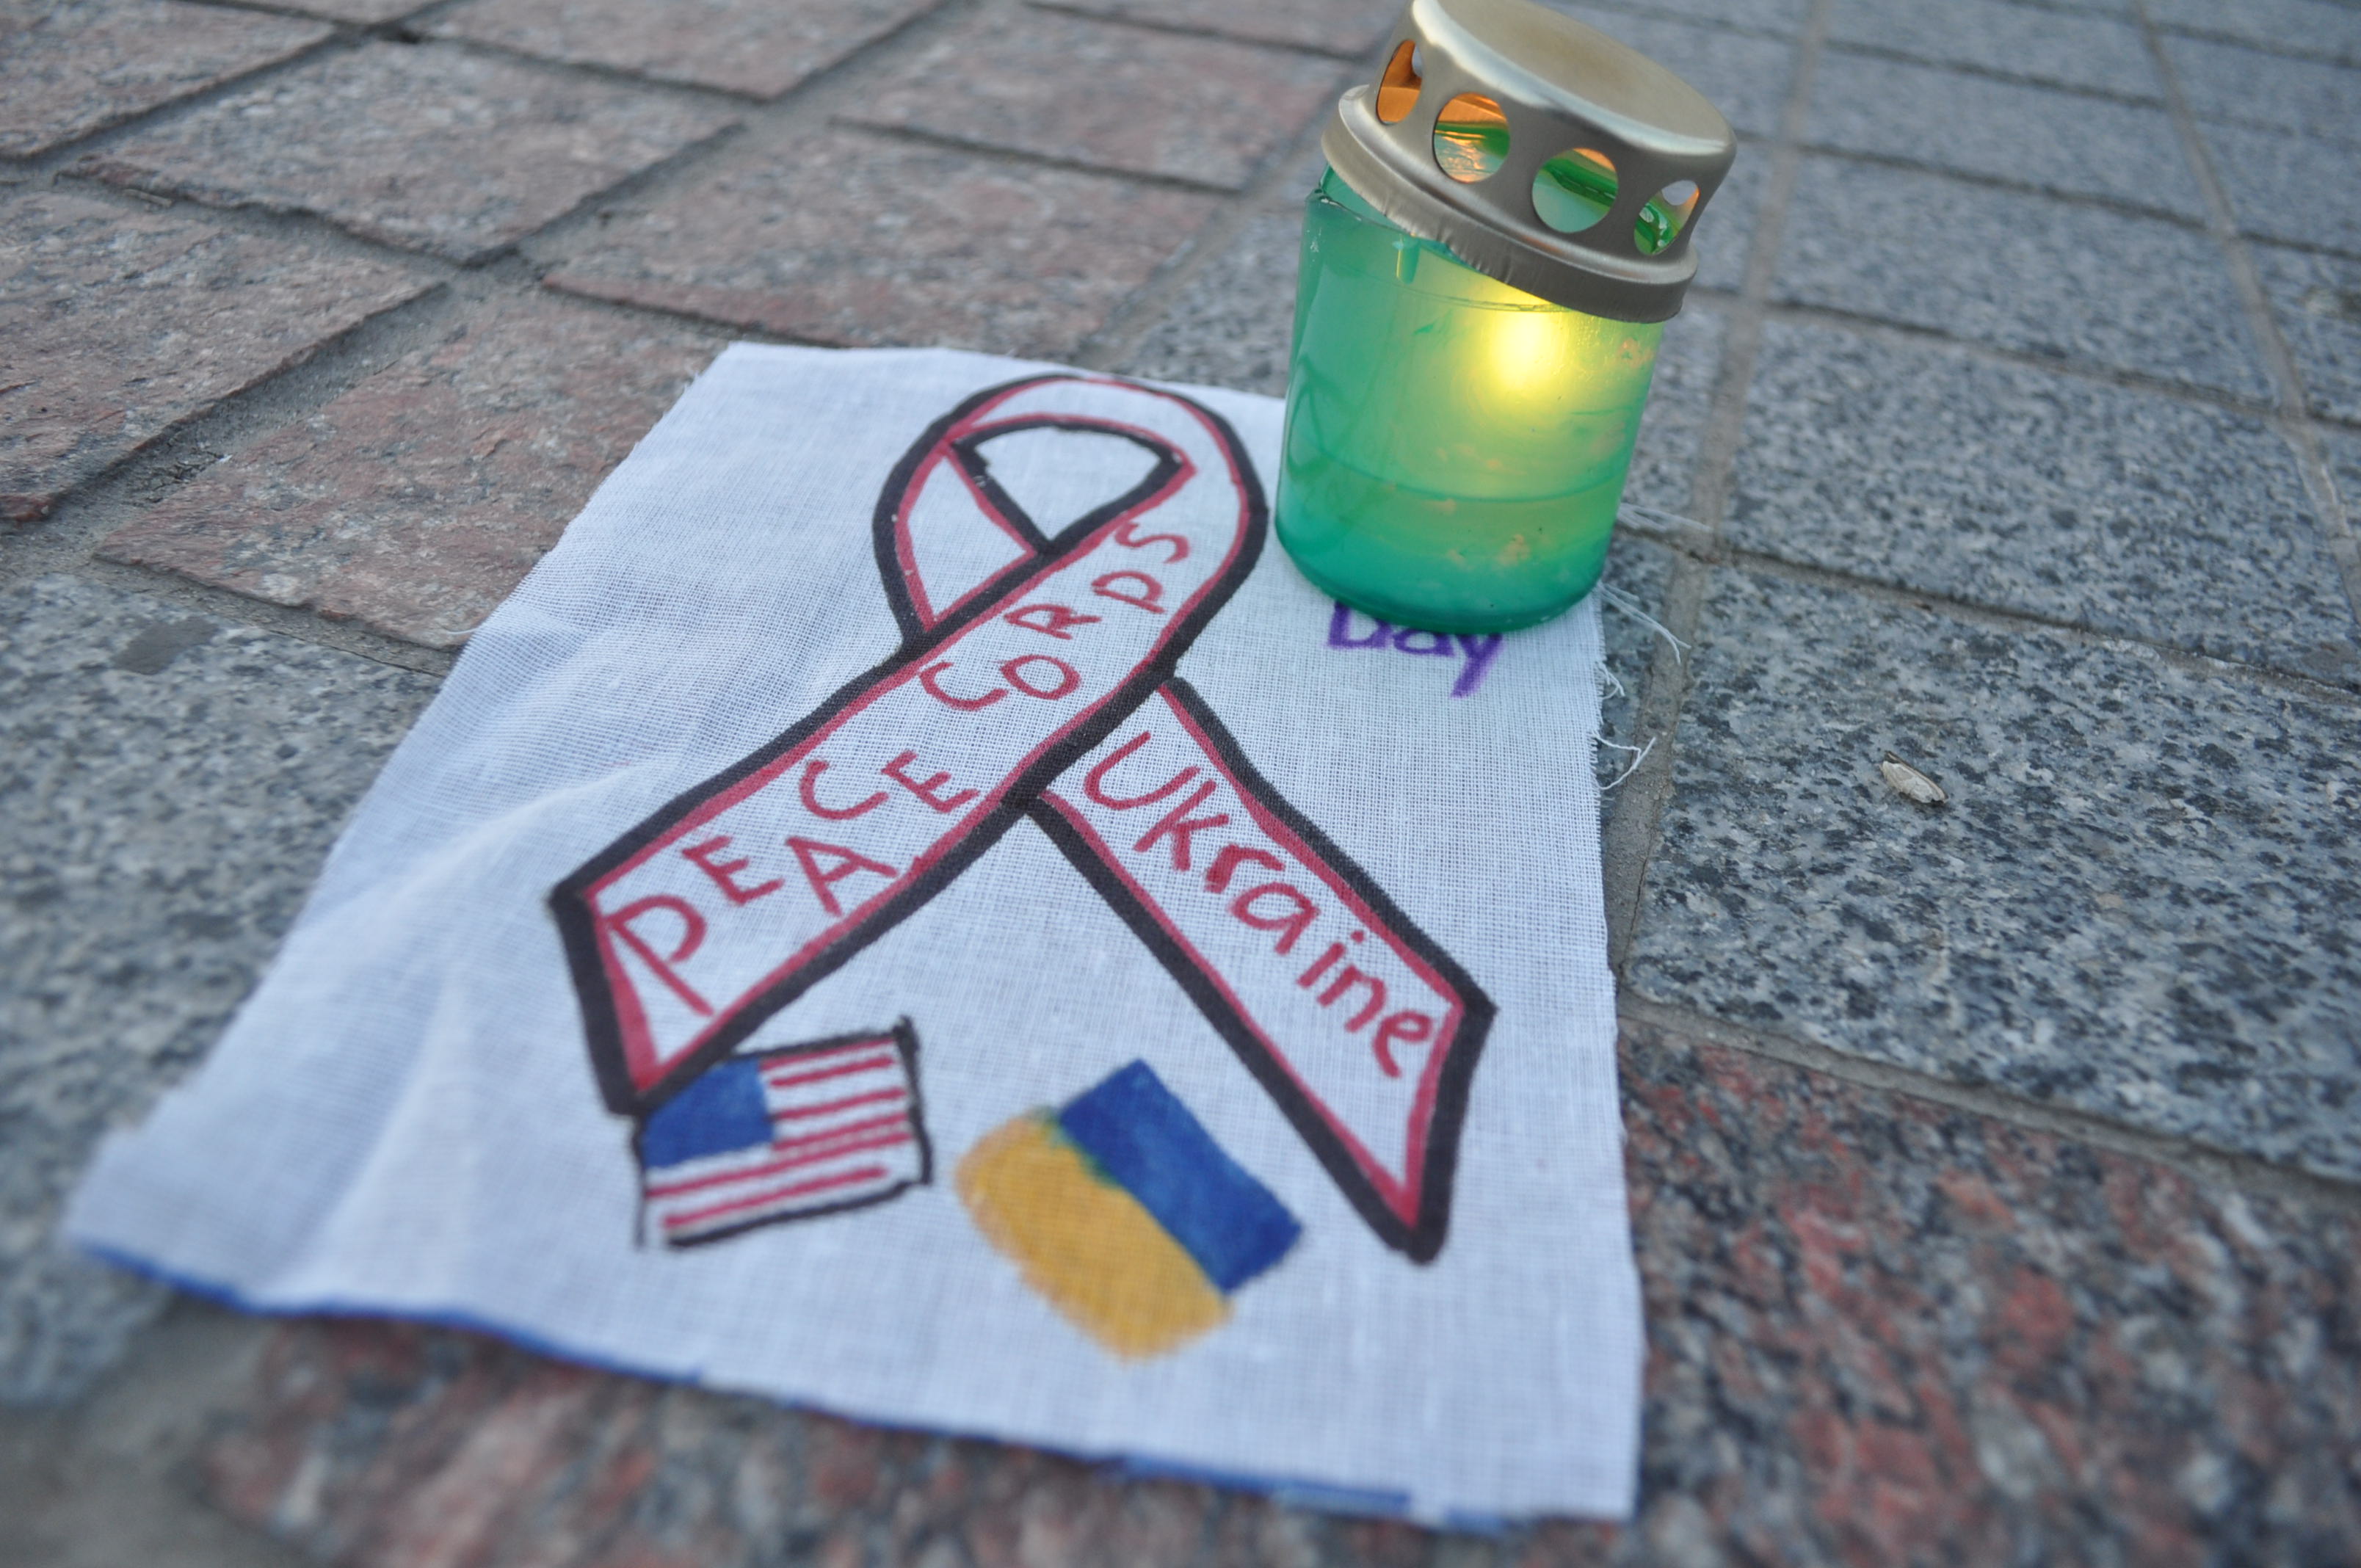 Candle lighting a small HIV/AIDS banner, Rivne, Ukraine, 2012, PC Digital Library